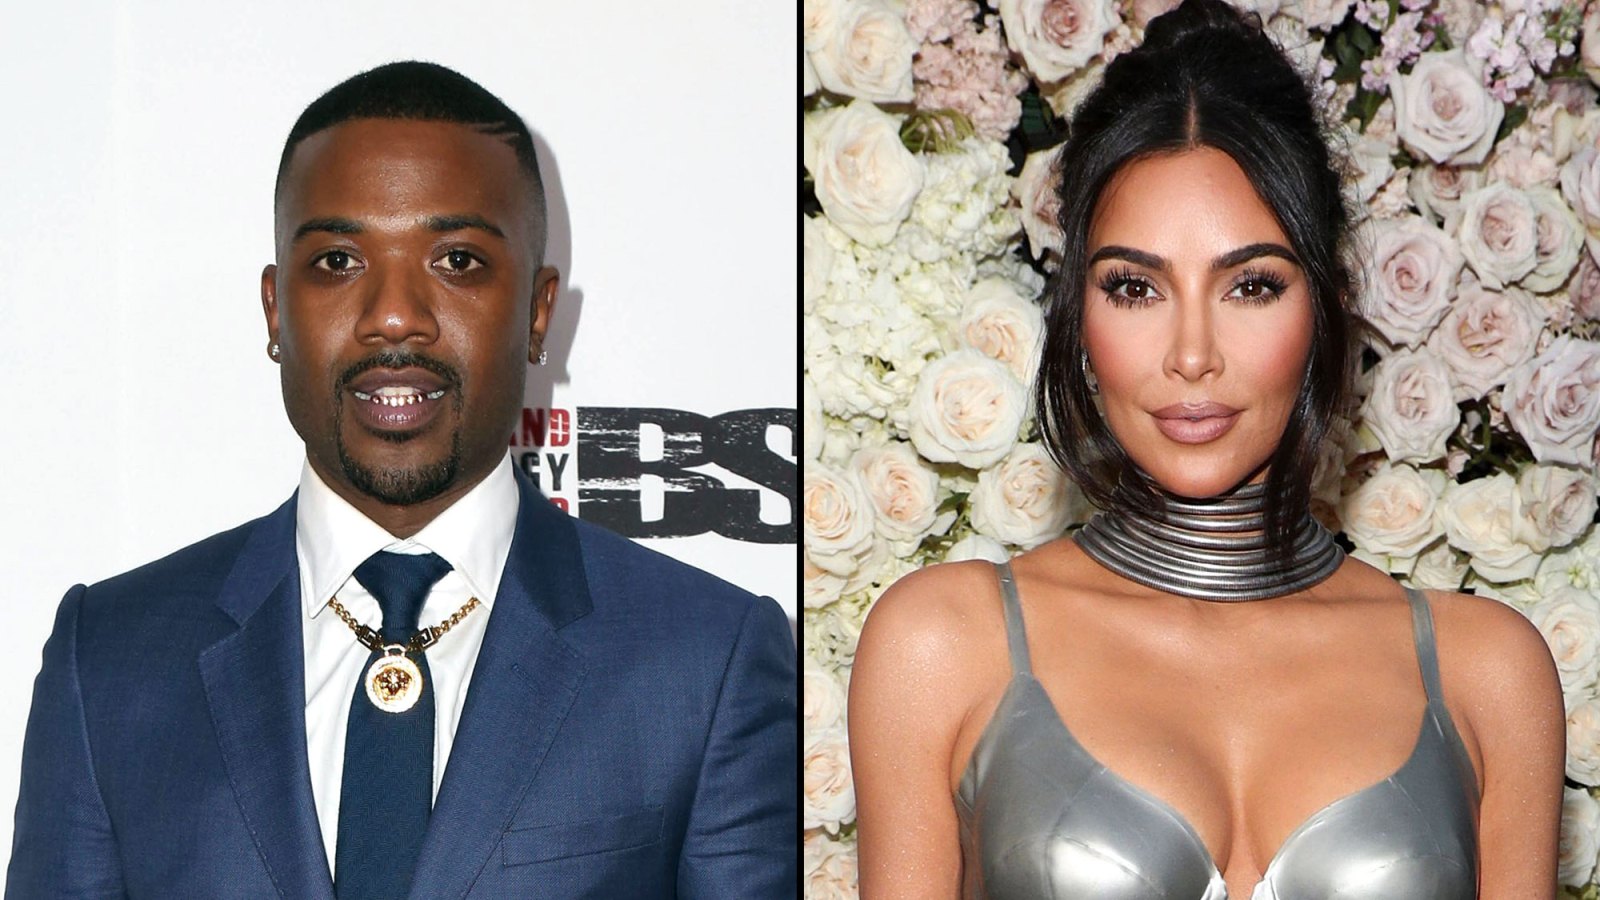 Ray J Shares Kim Kardashian's Alleged DMs About Sex Tape Release